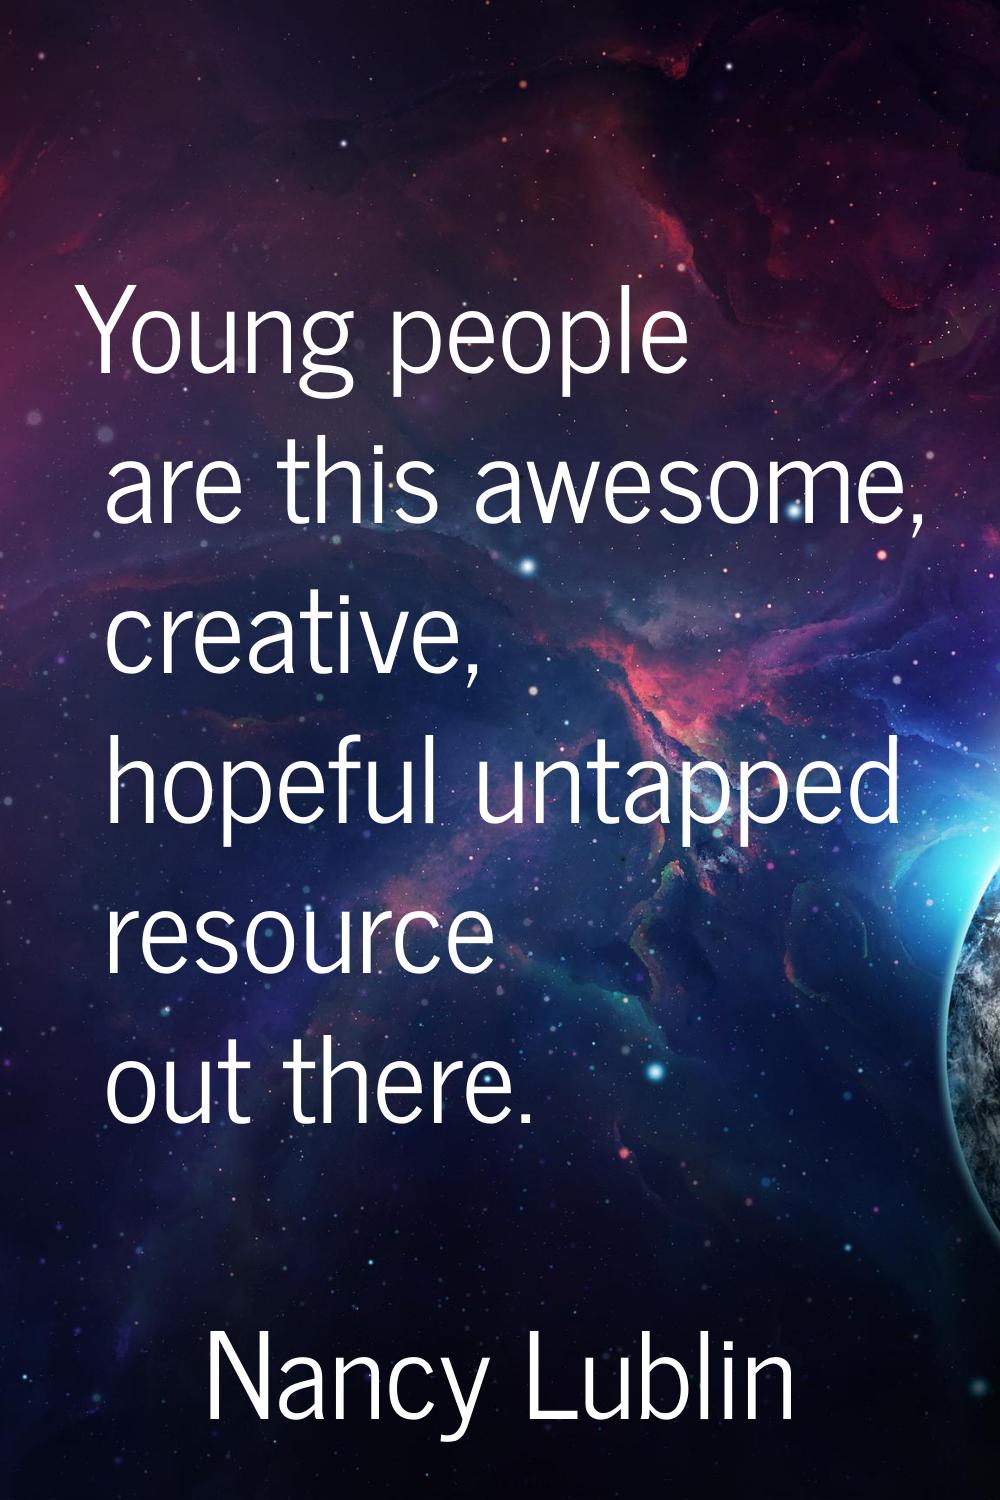 Young people are this awesome, creative, hopeful untapped resource out there.